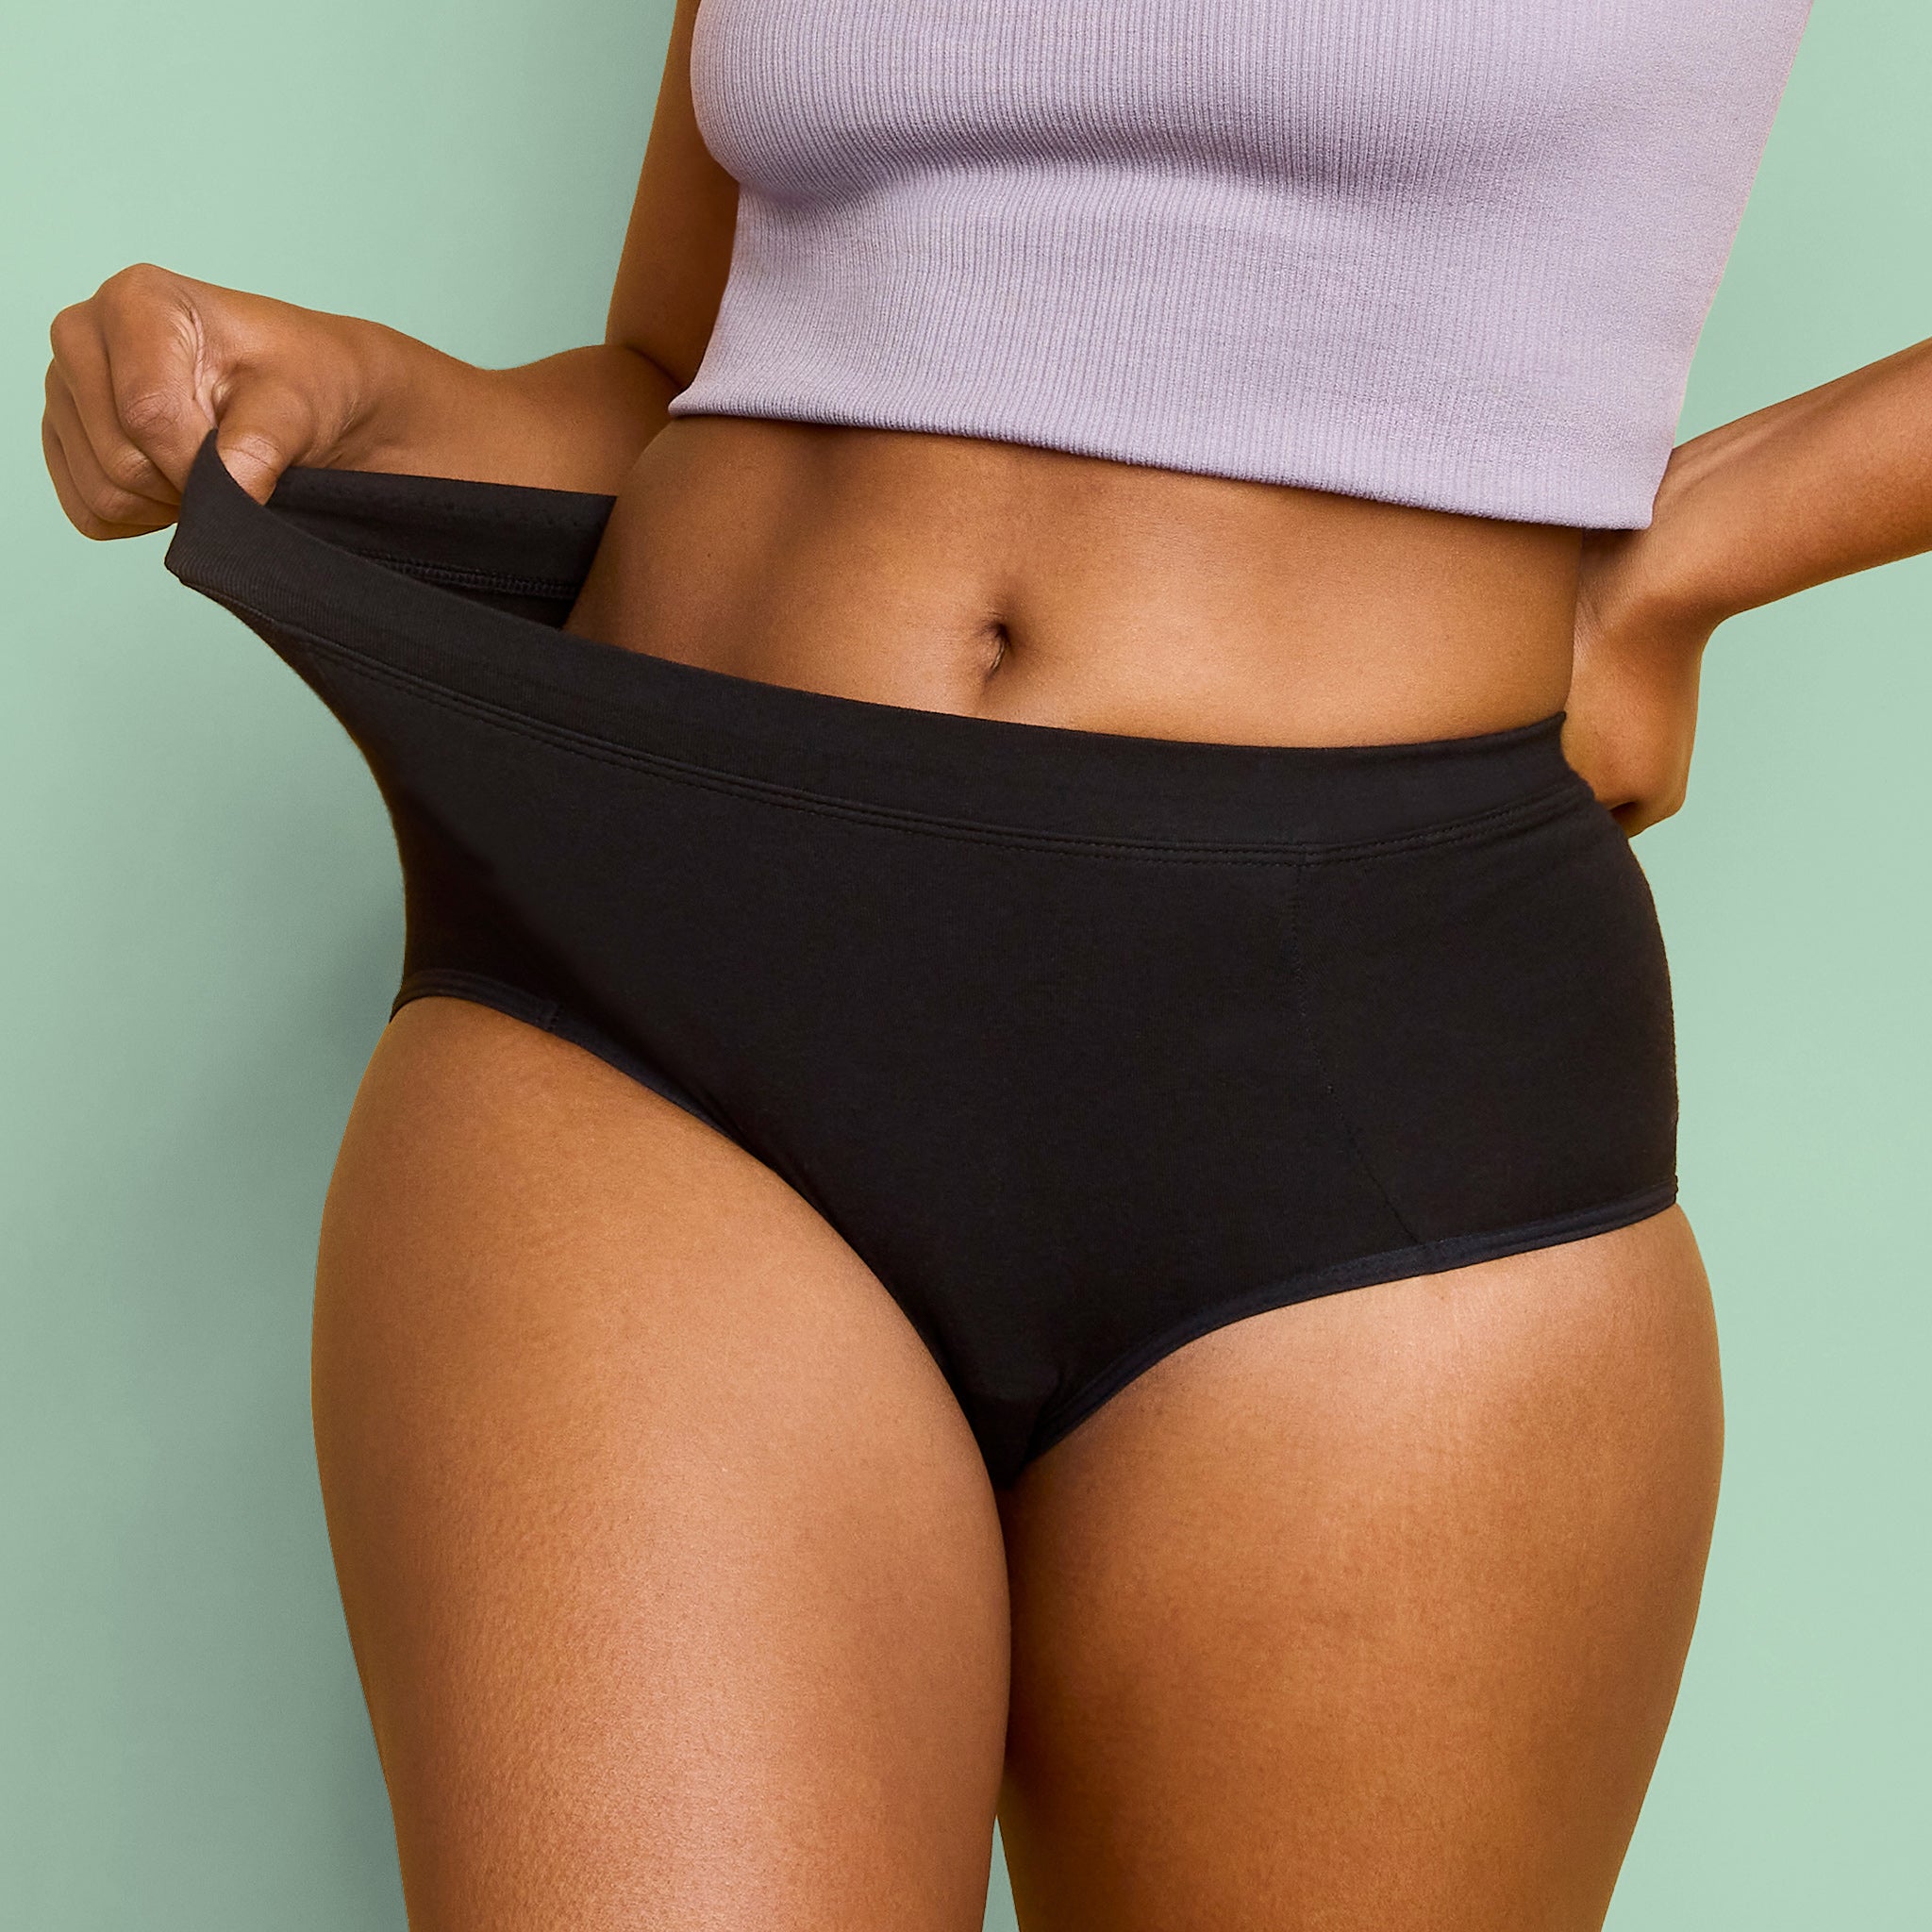 Period Panties: Are they worth the hype? - The New Feminist